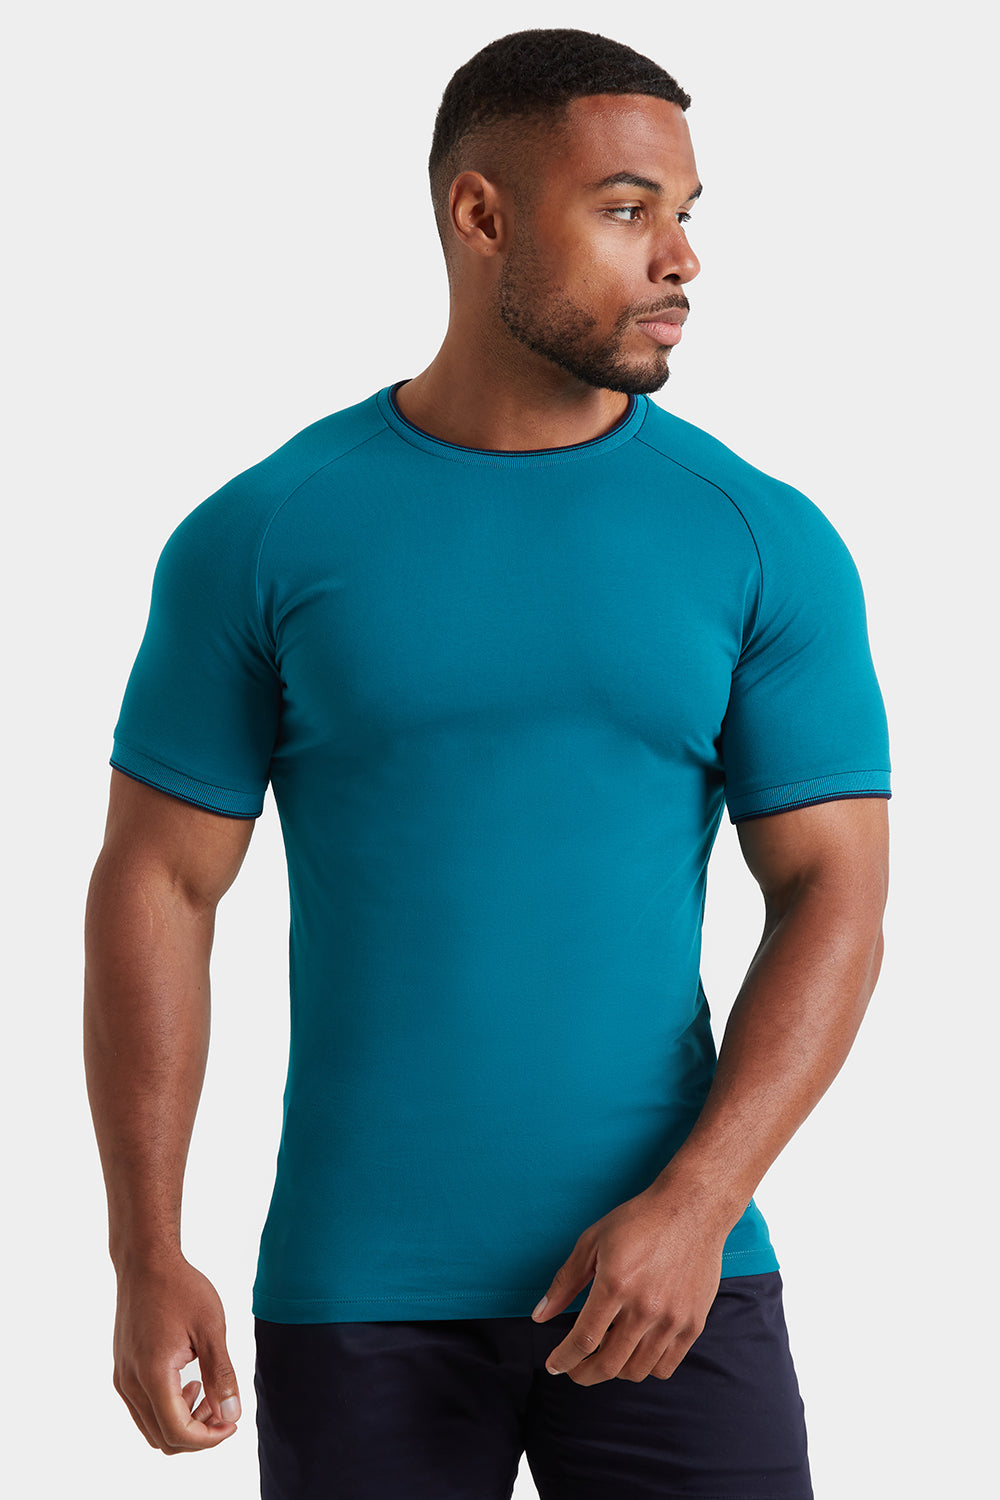 Tipped T-shirt in Peacock - TAILORED ATHLETE - ROW